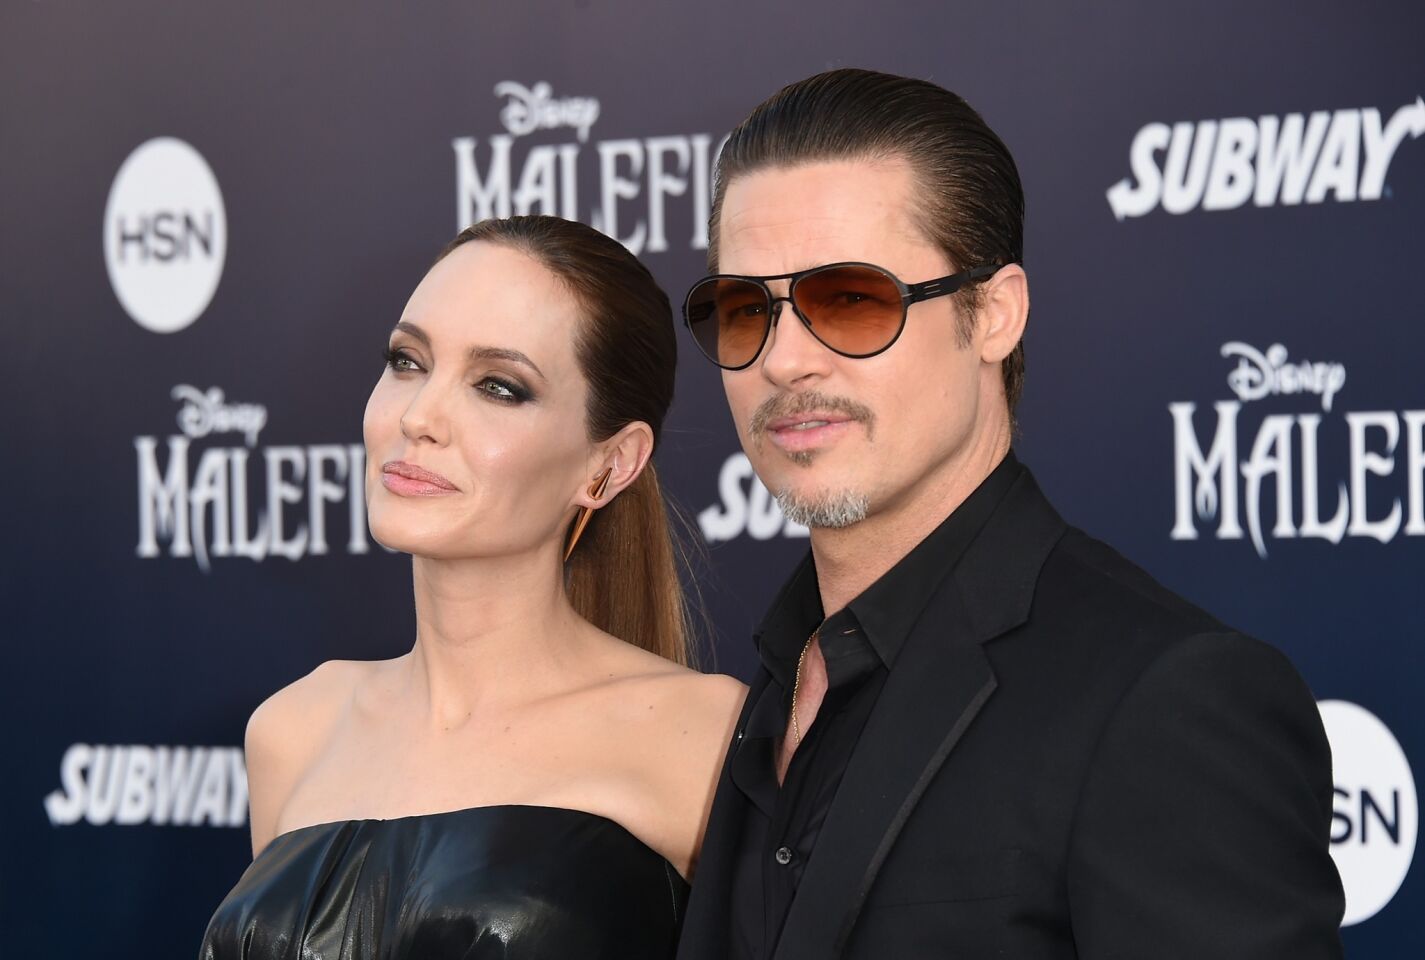 Angelina Jolie and Brad Pitt attend the world premiere of Disney's "Maleficent" at the El Capitan Theatre on May 28, 2014, in Hollywood.